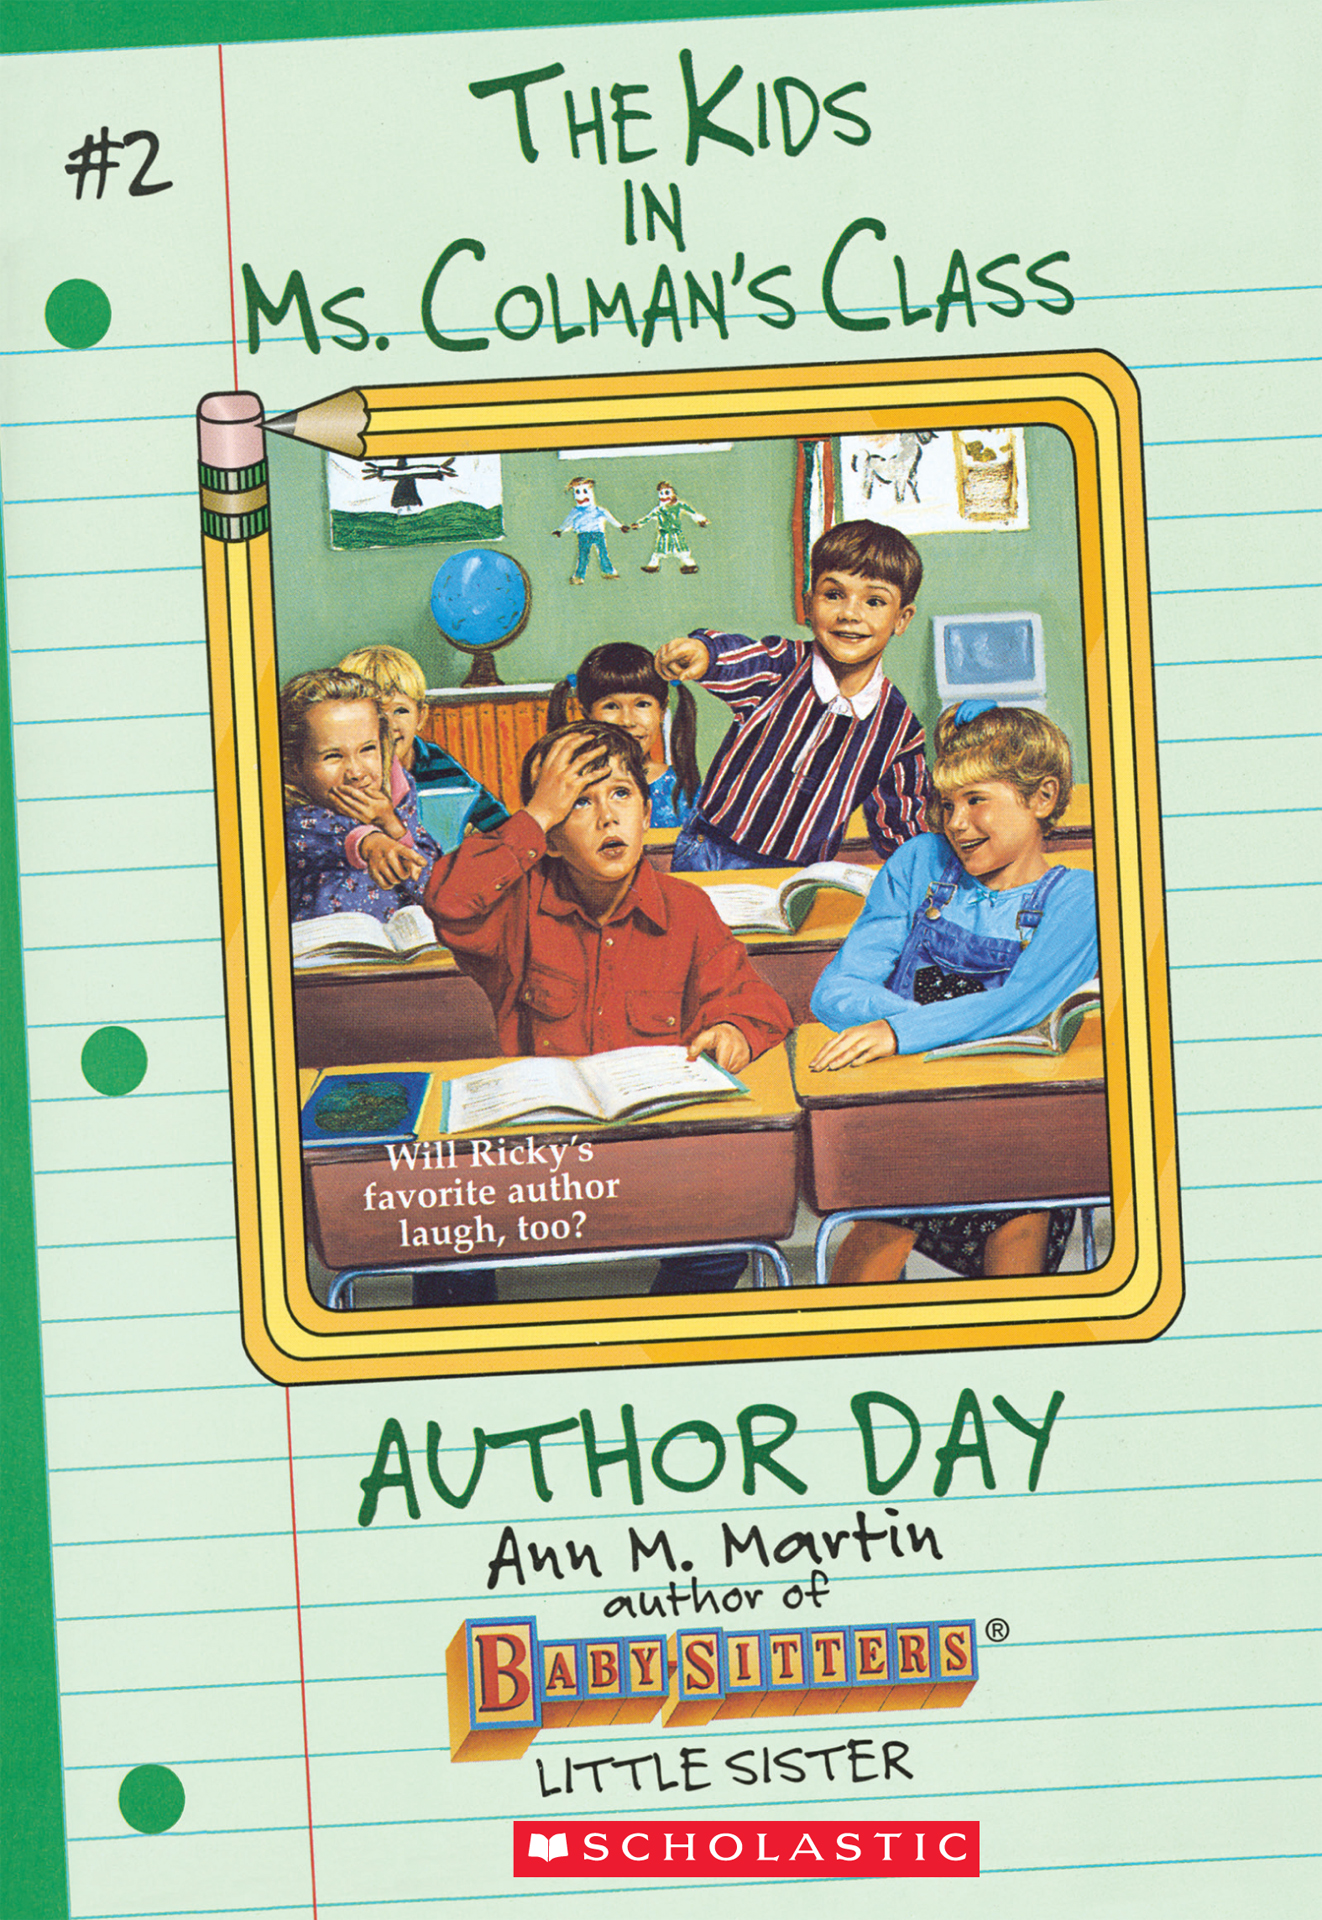 The Author Day